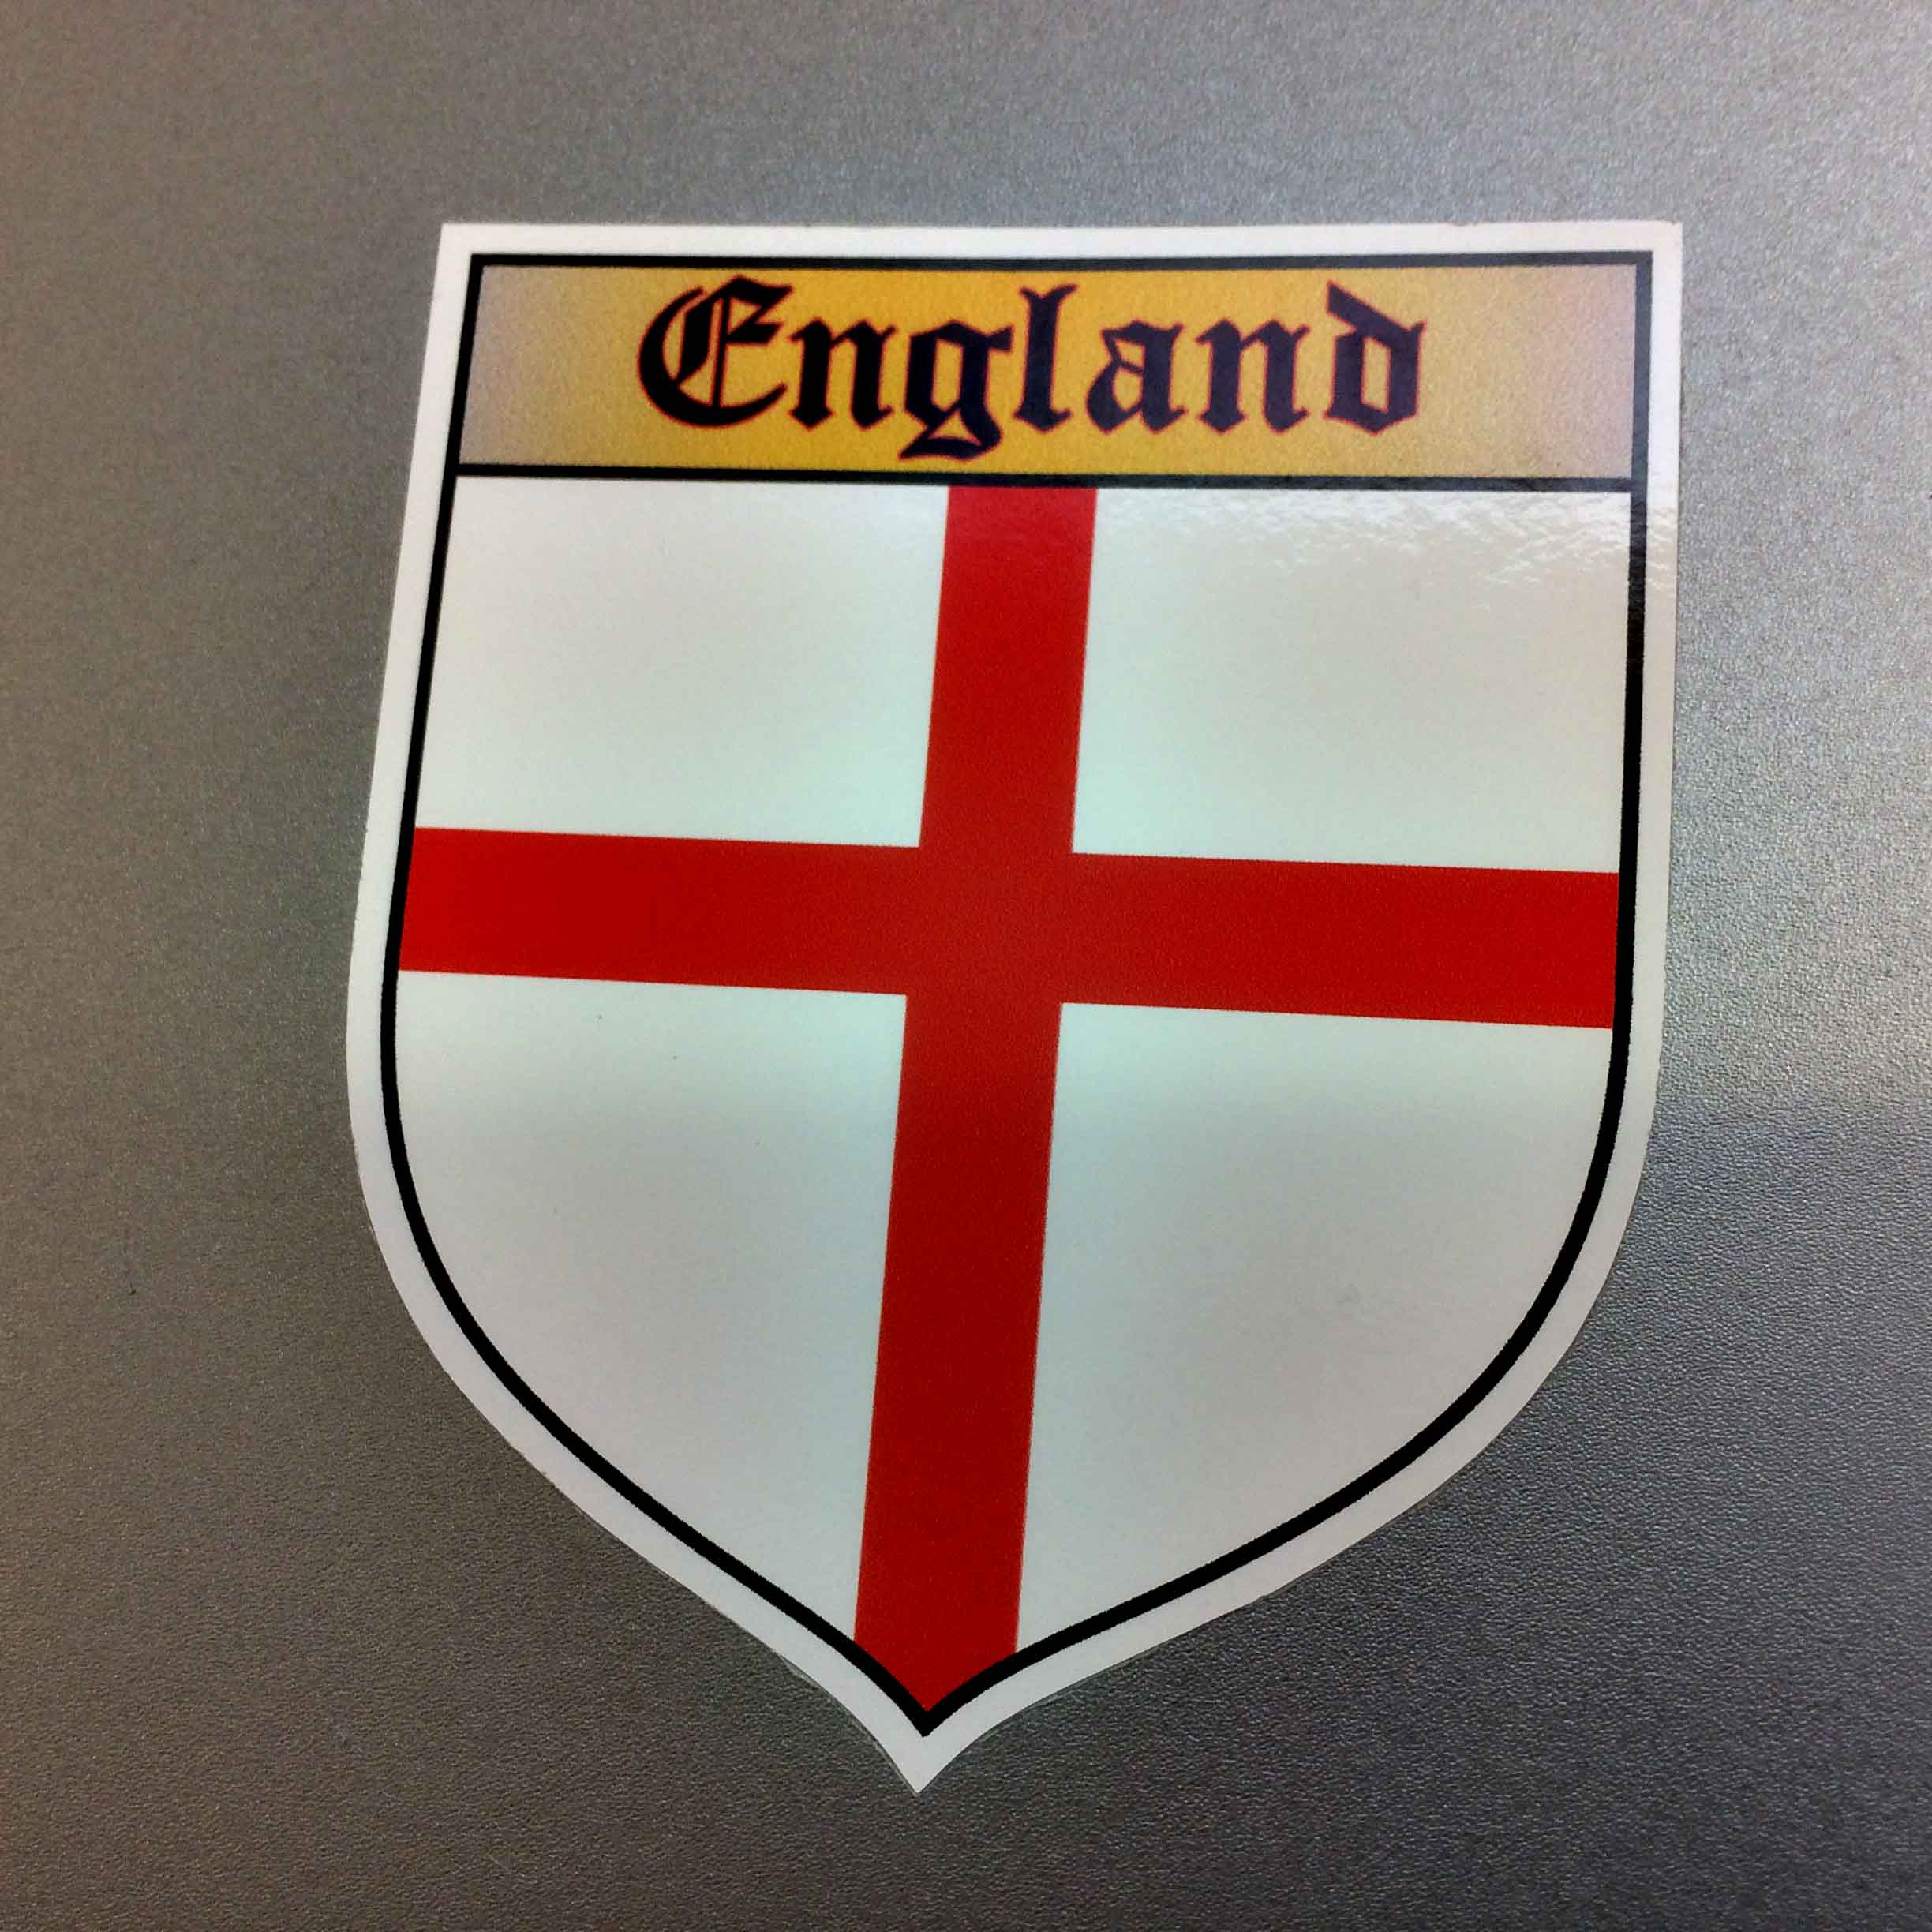 ENGLAND COUNTY SHIELD GB STICKER. An England shield. A red cross on a white field. Across the top on a gold banner is England in black Gothic font.